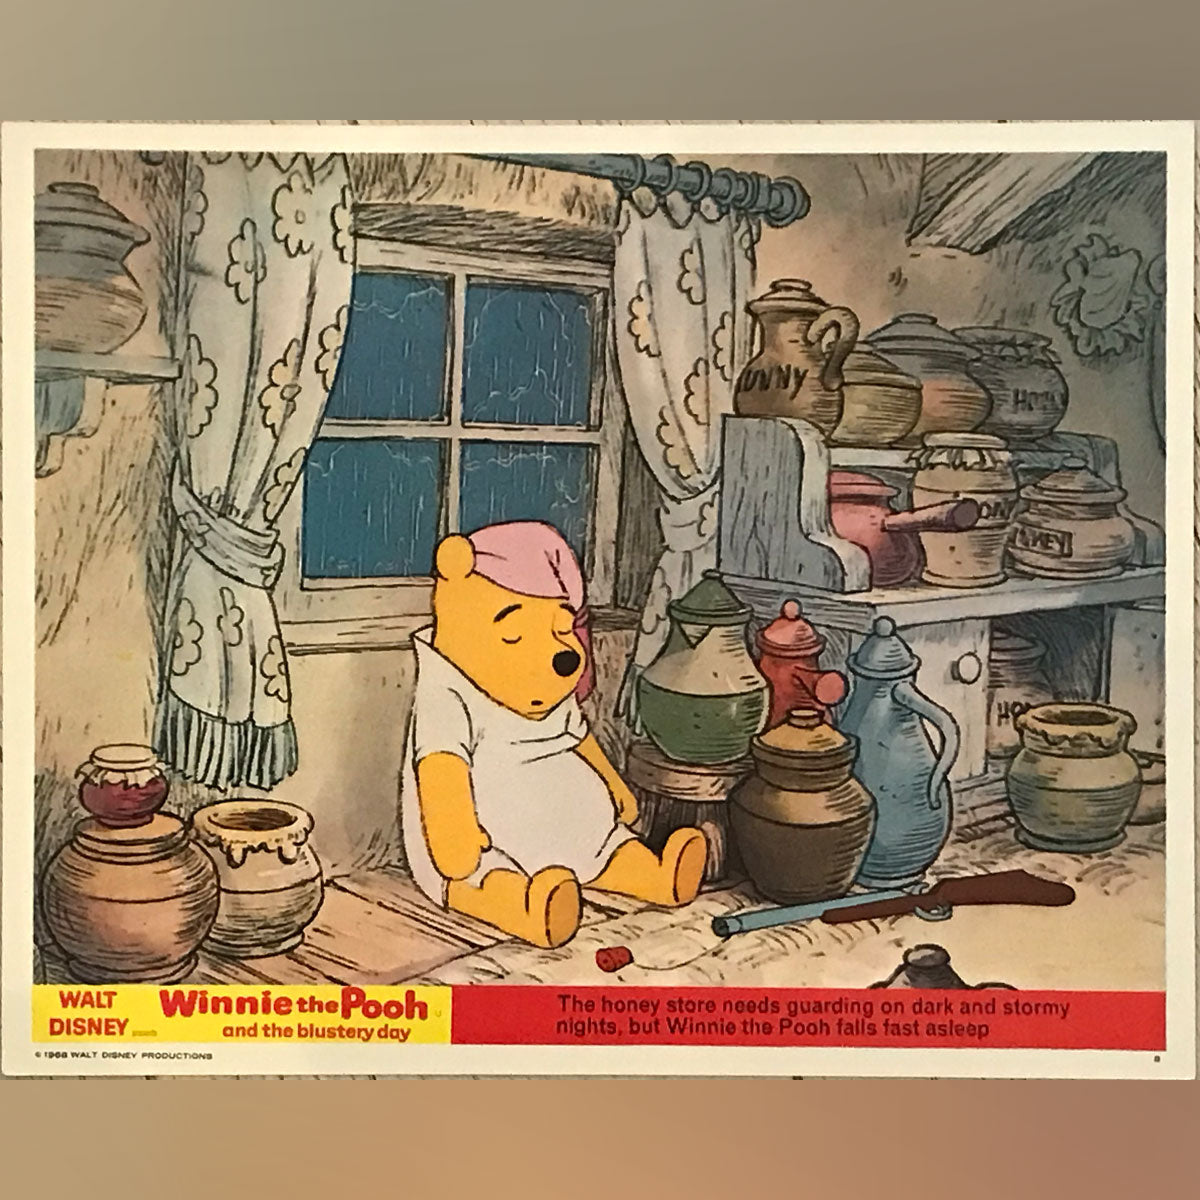 Winnie The Pooh and The Blustery Day (1968)